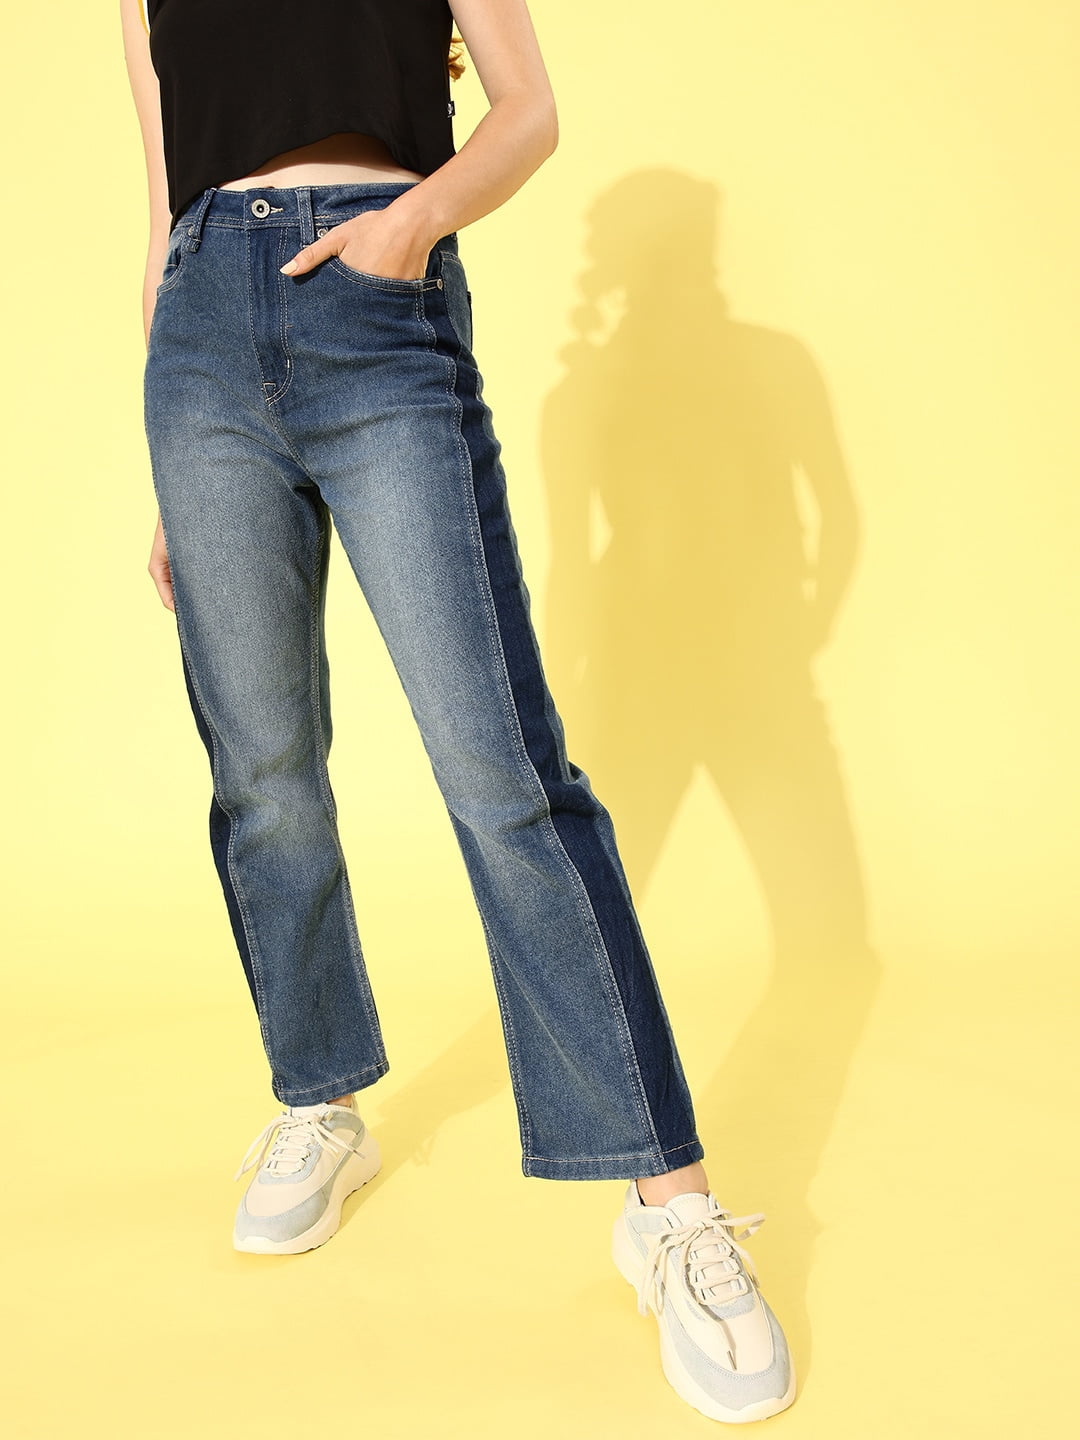 Buy ONLY Blue Washed Jeans - Jeans for Women 1323819 | Myntra